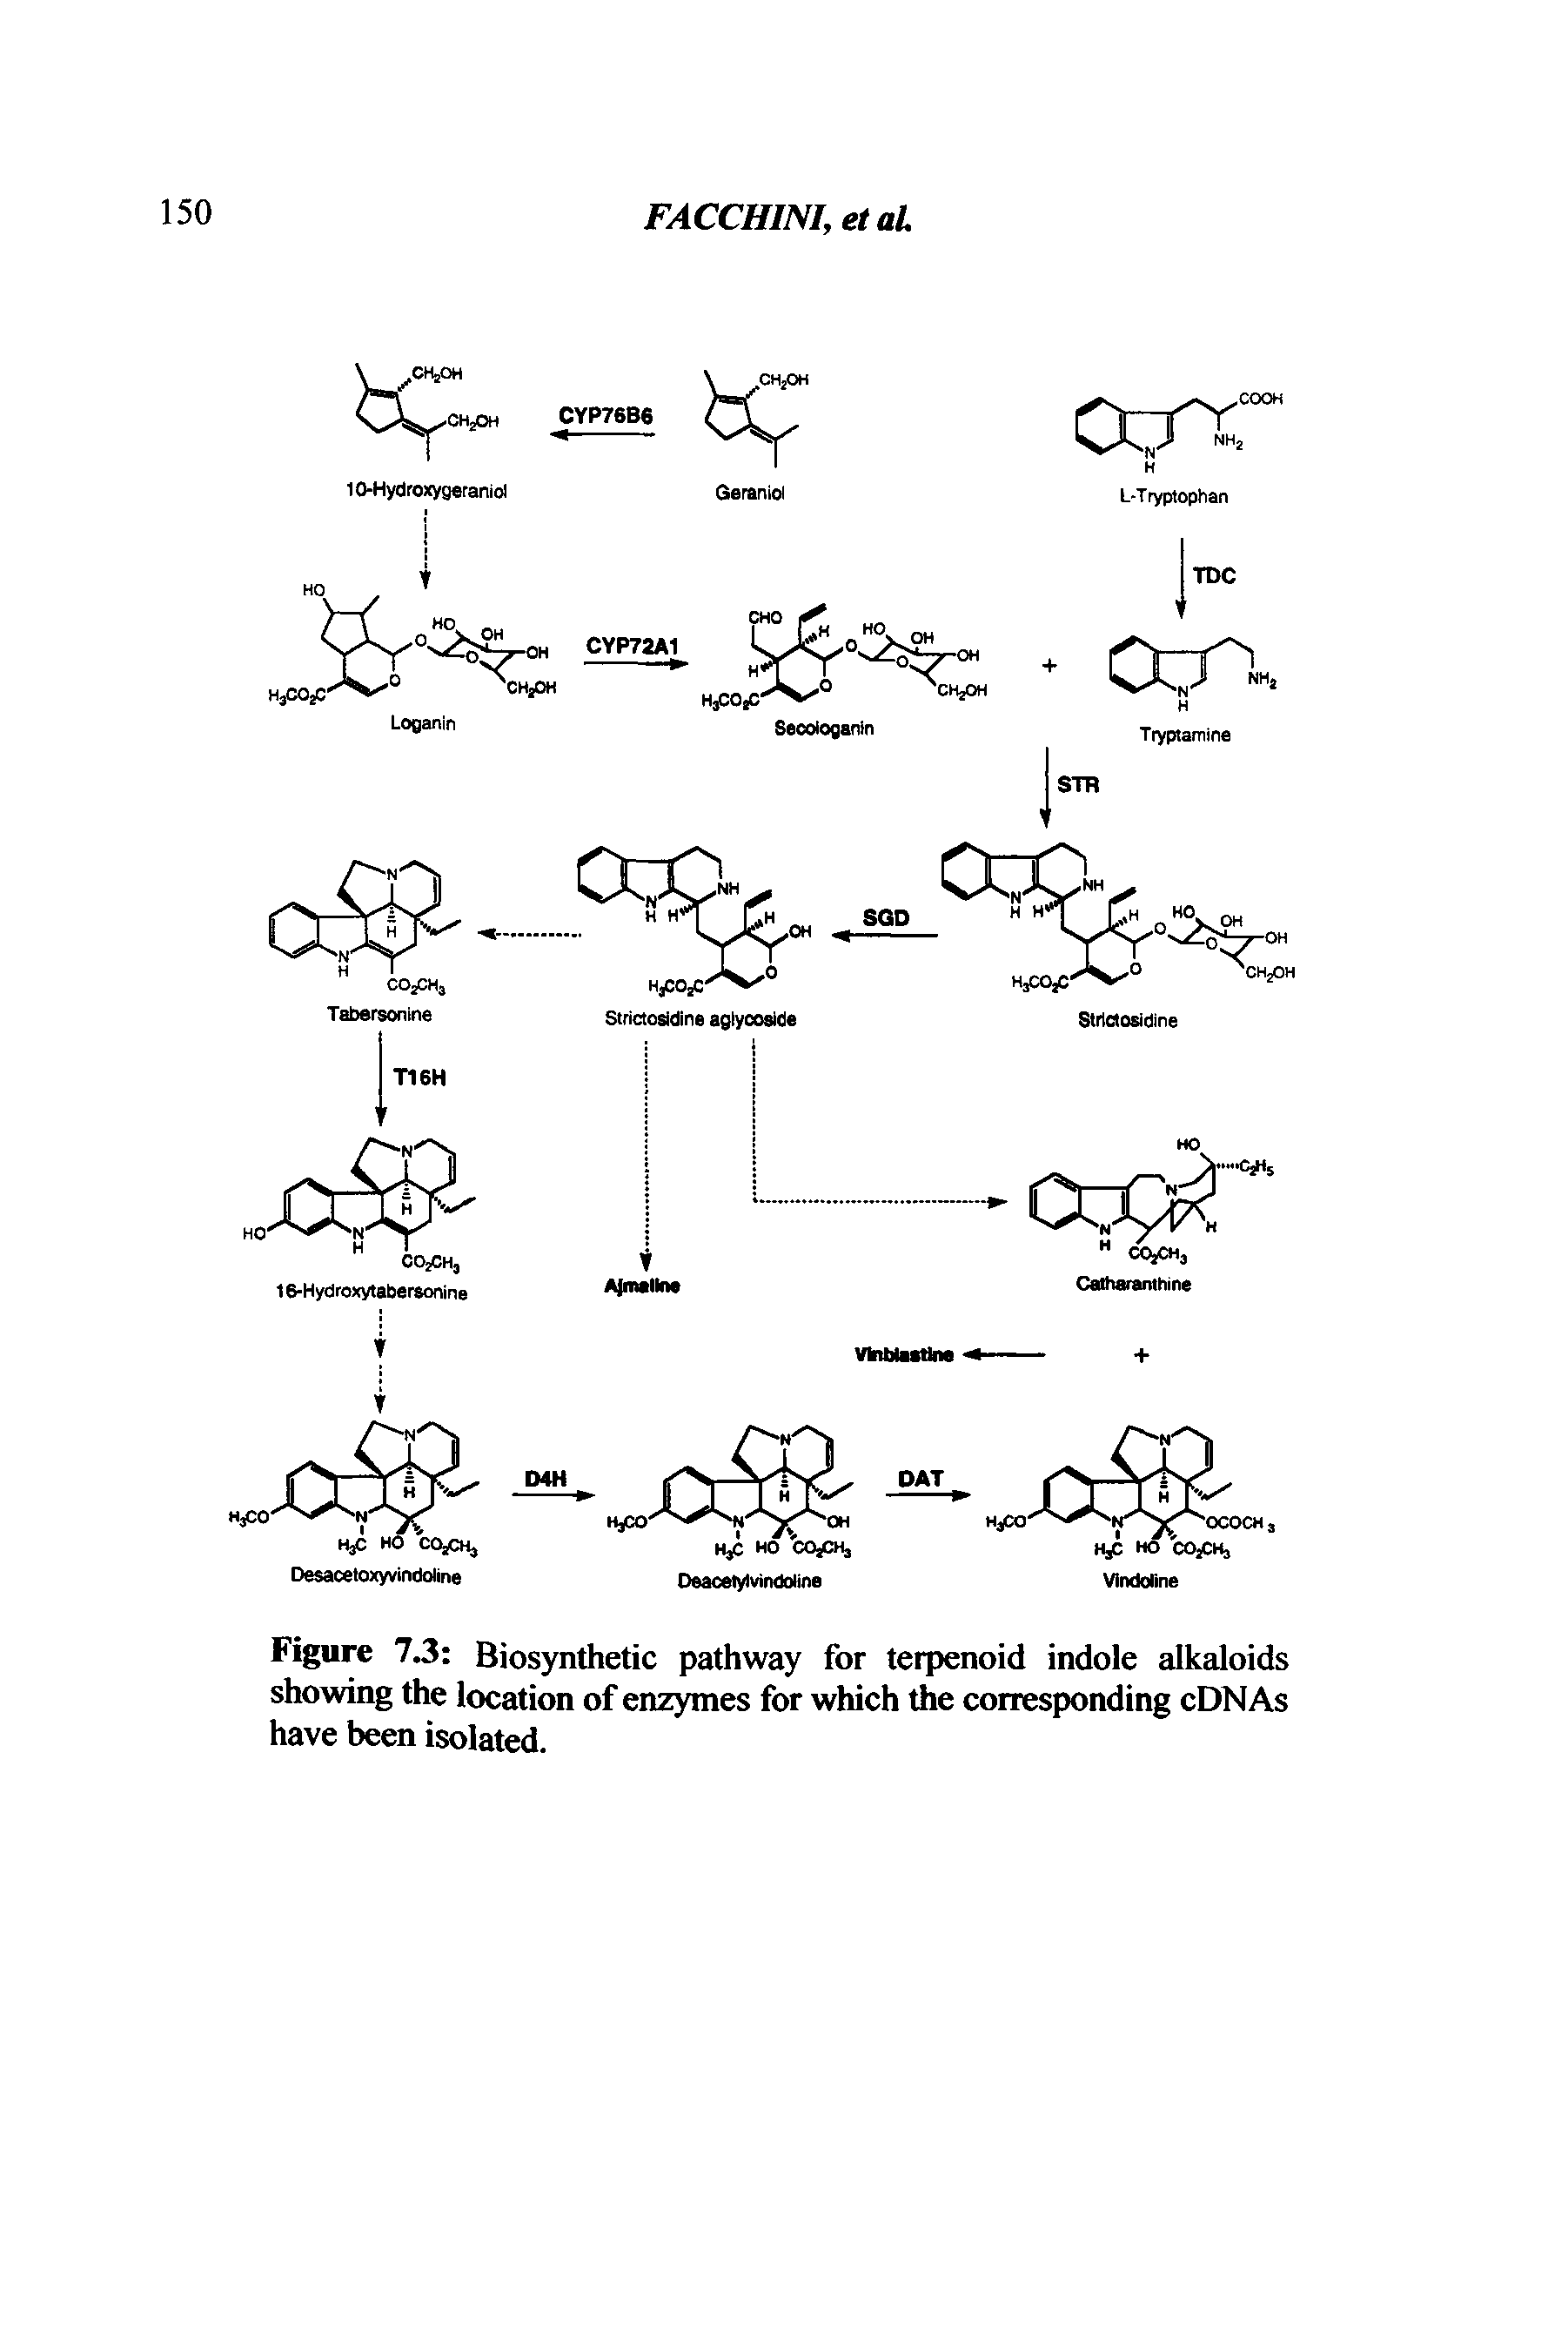 Figure 7.3 Biosynthetic pathway for terpenoid indole alkaloids showing the location of enzymes for which the corresponding cDNAs have been isolated.